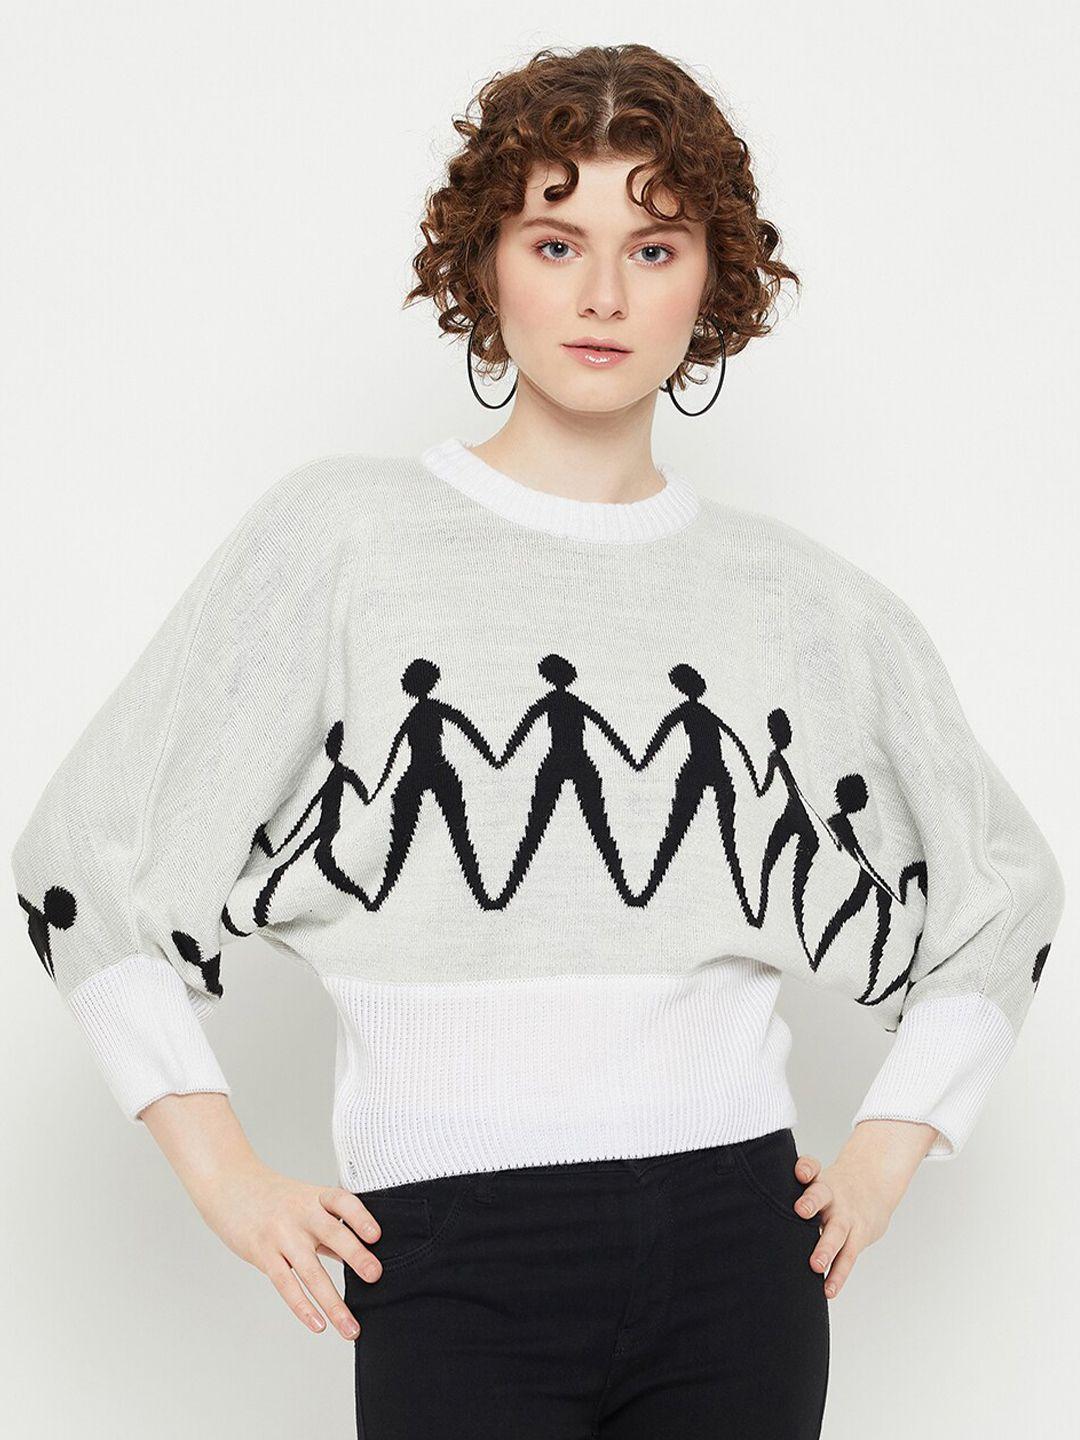 kasma quirky printed woollen pullover